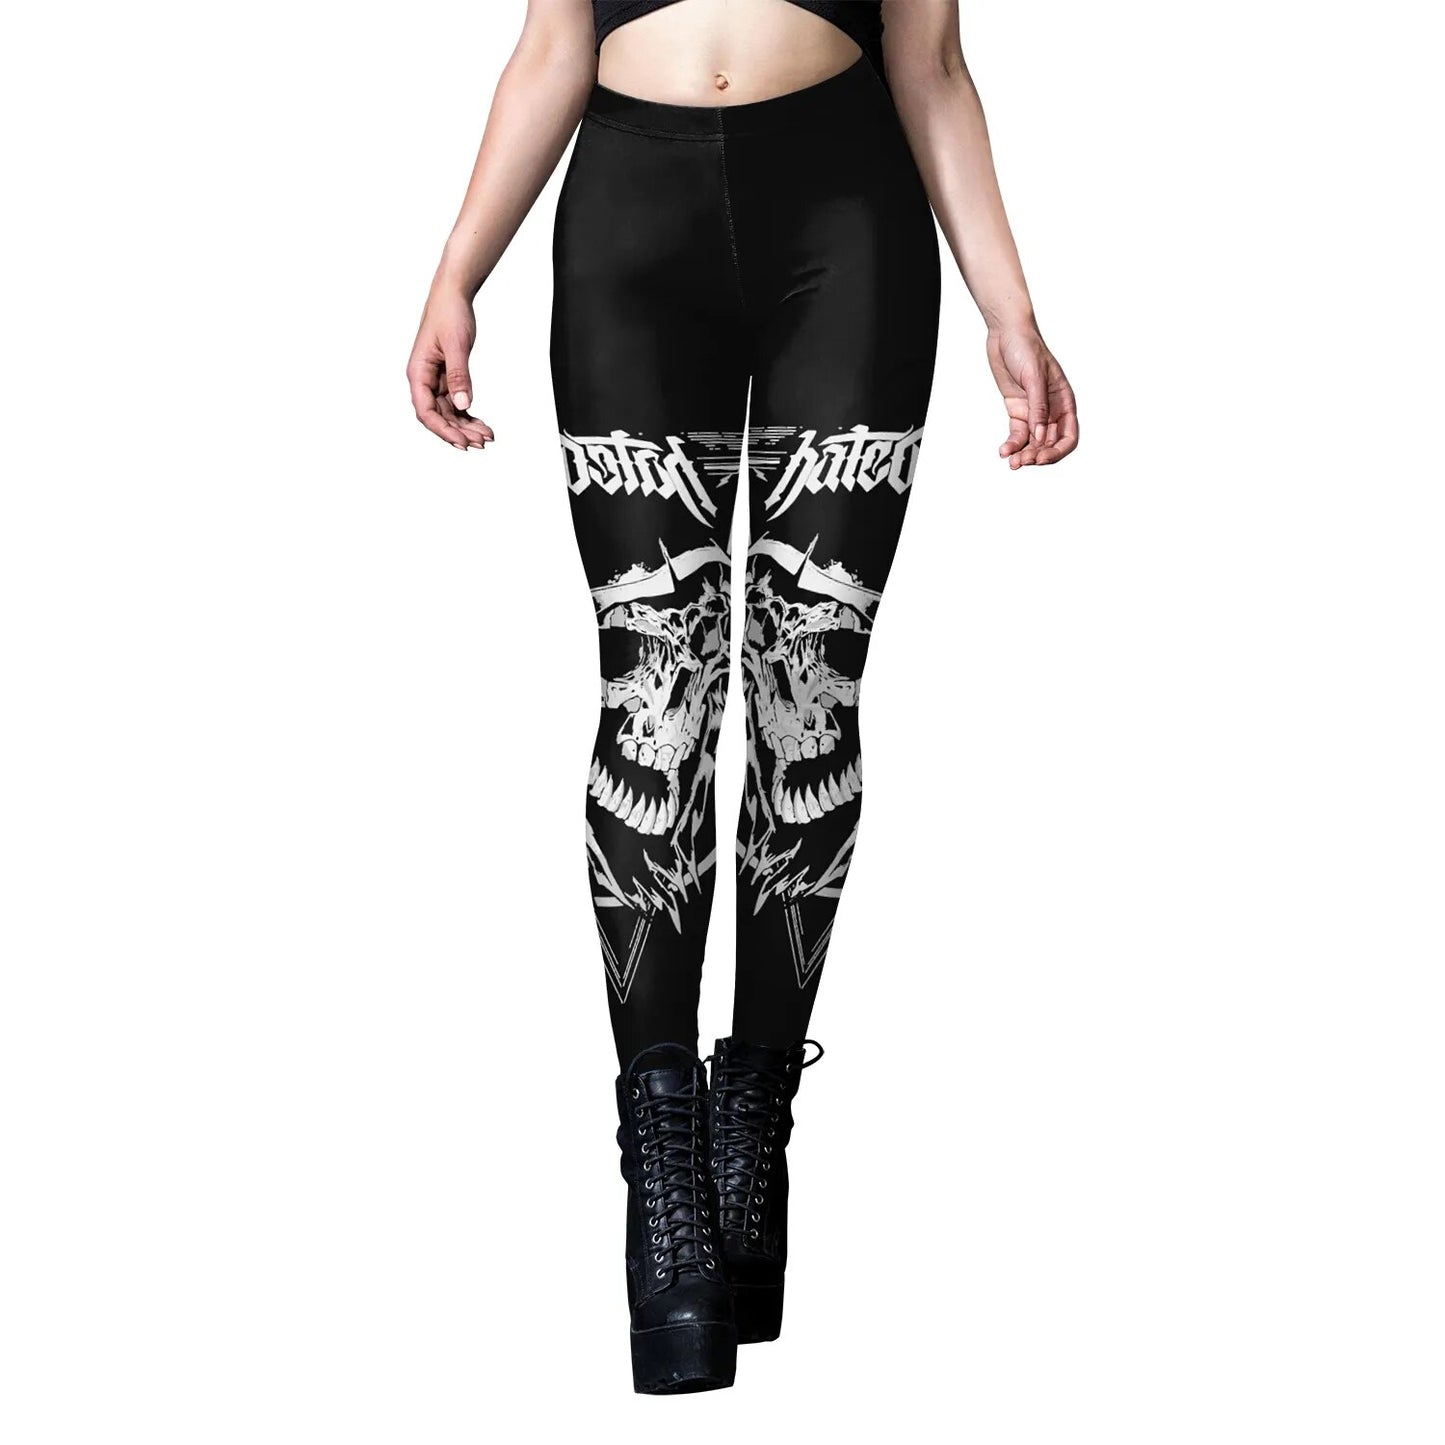 Gothic Black Graphic Leggings | Hated | Mid Rise Form Fitting Sleek & Stylish Total Comfort - A Gothic Universe - Leggings